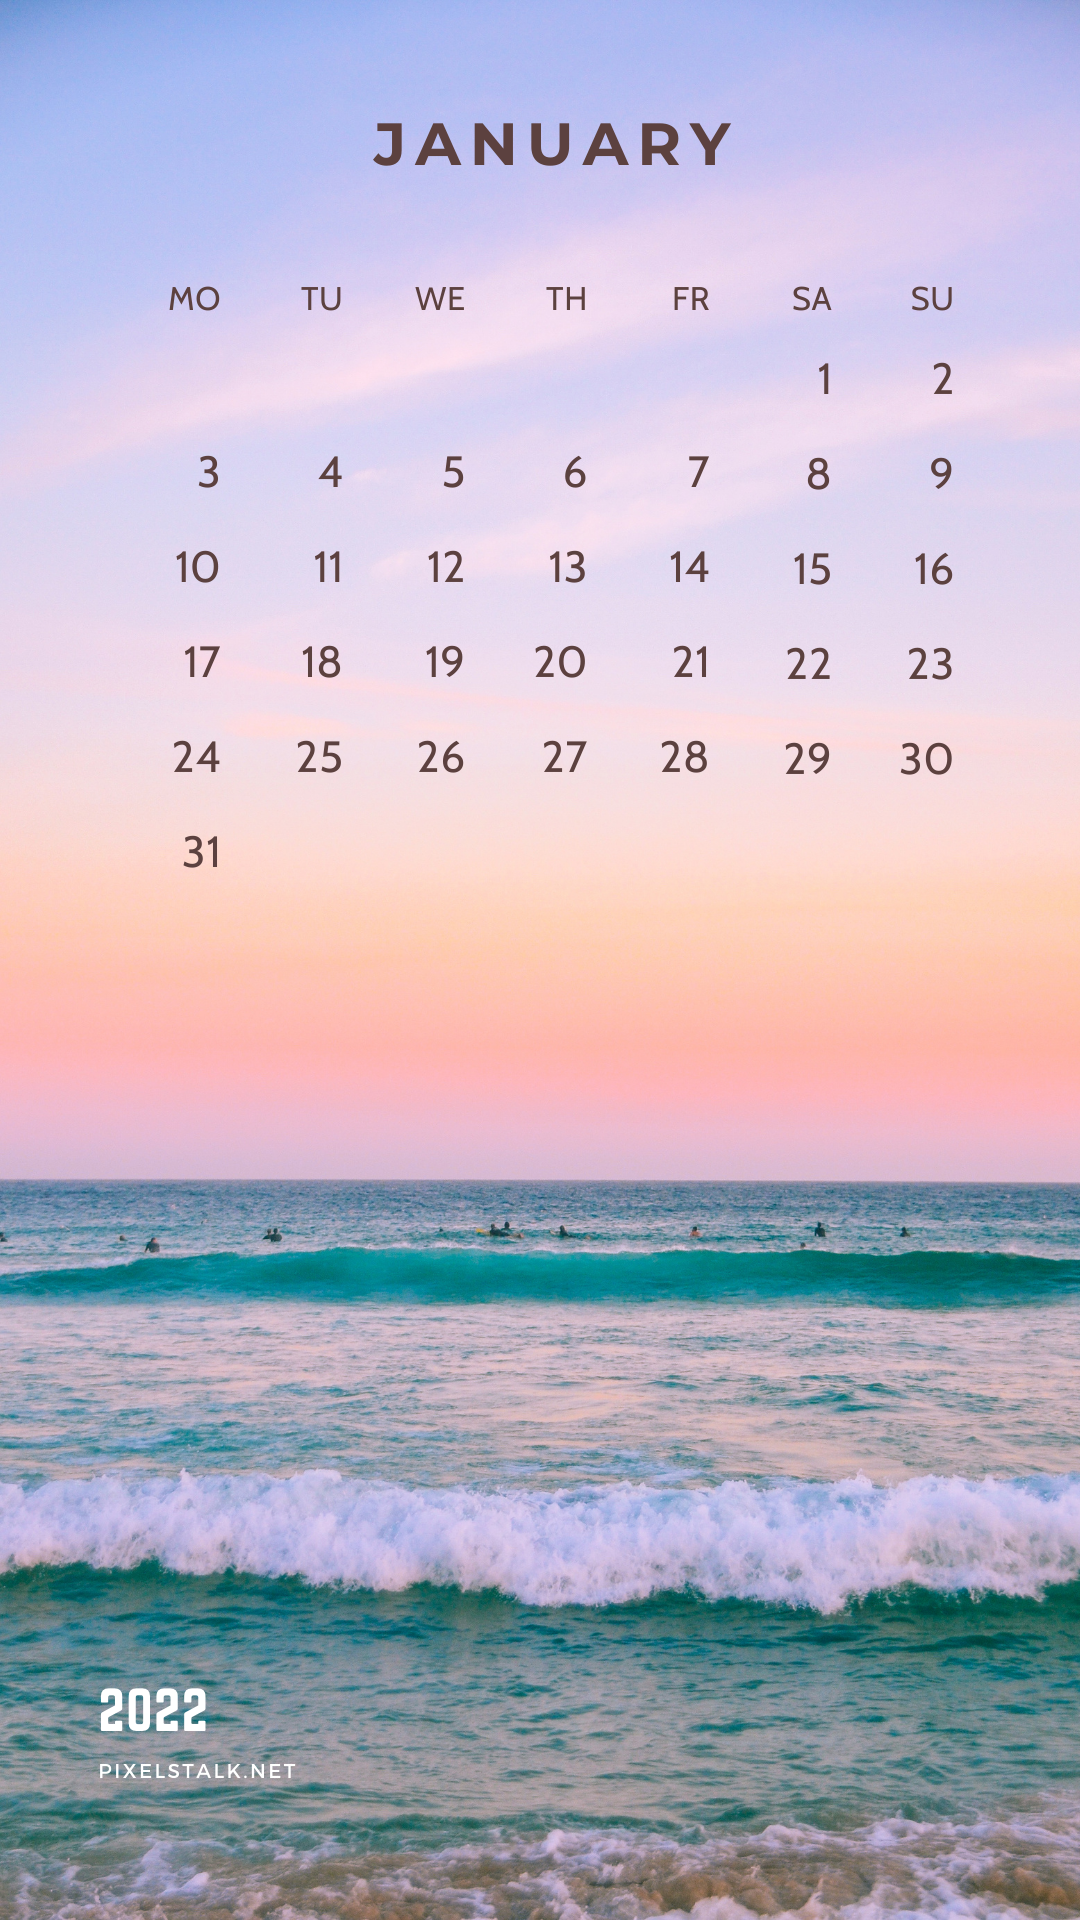 January 2022 Calendar Wallpaper Images  Free Photos PNG Stickers  Wallpapers  Backgrounds  rawpixel